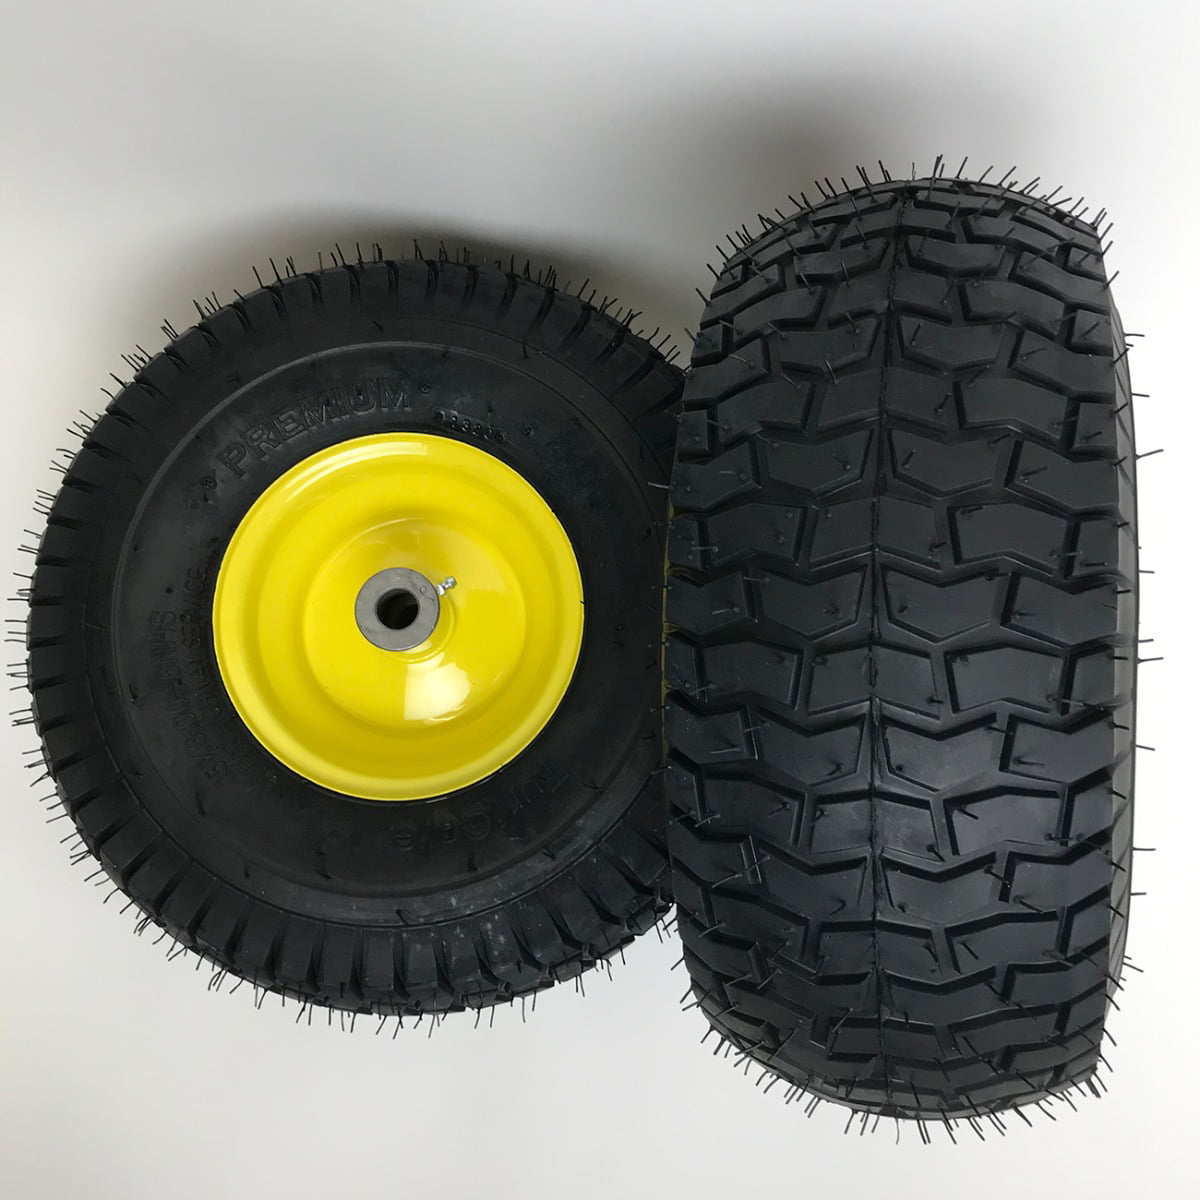 Set of 2 - 15x6.00-6 Lawn Mower Tire and Rim - Fits on 3/4 Inch Axle